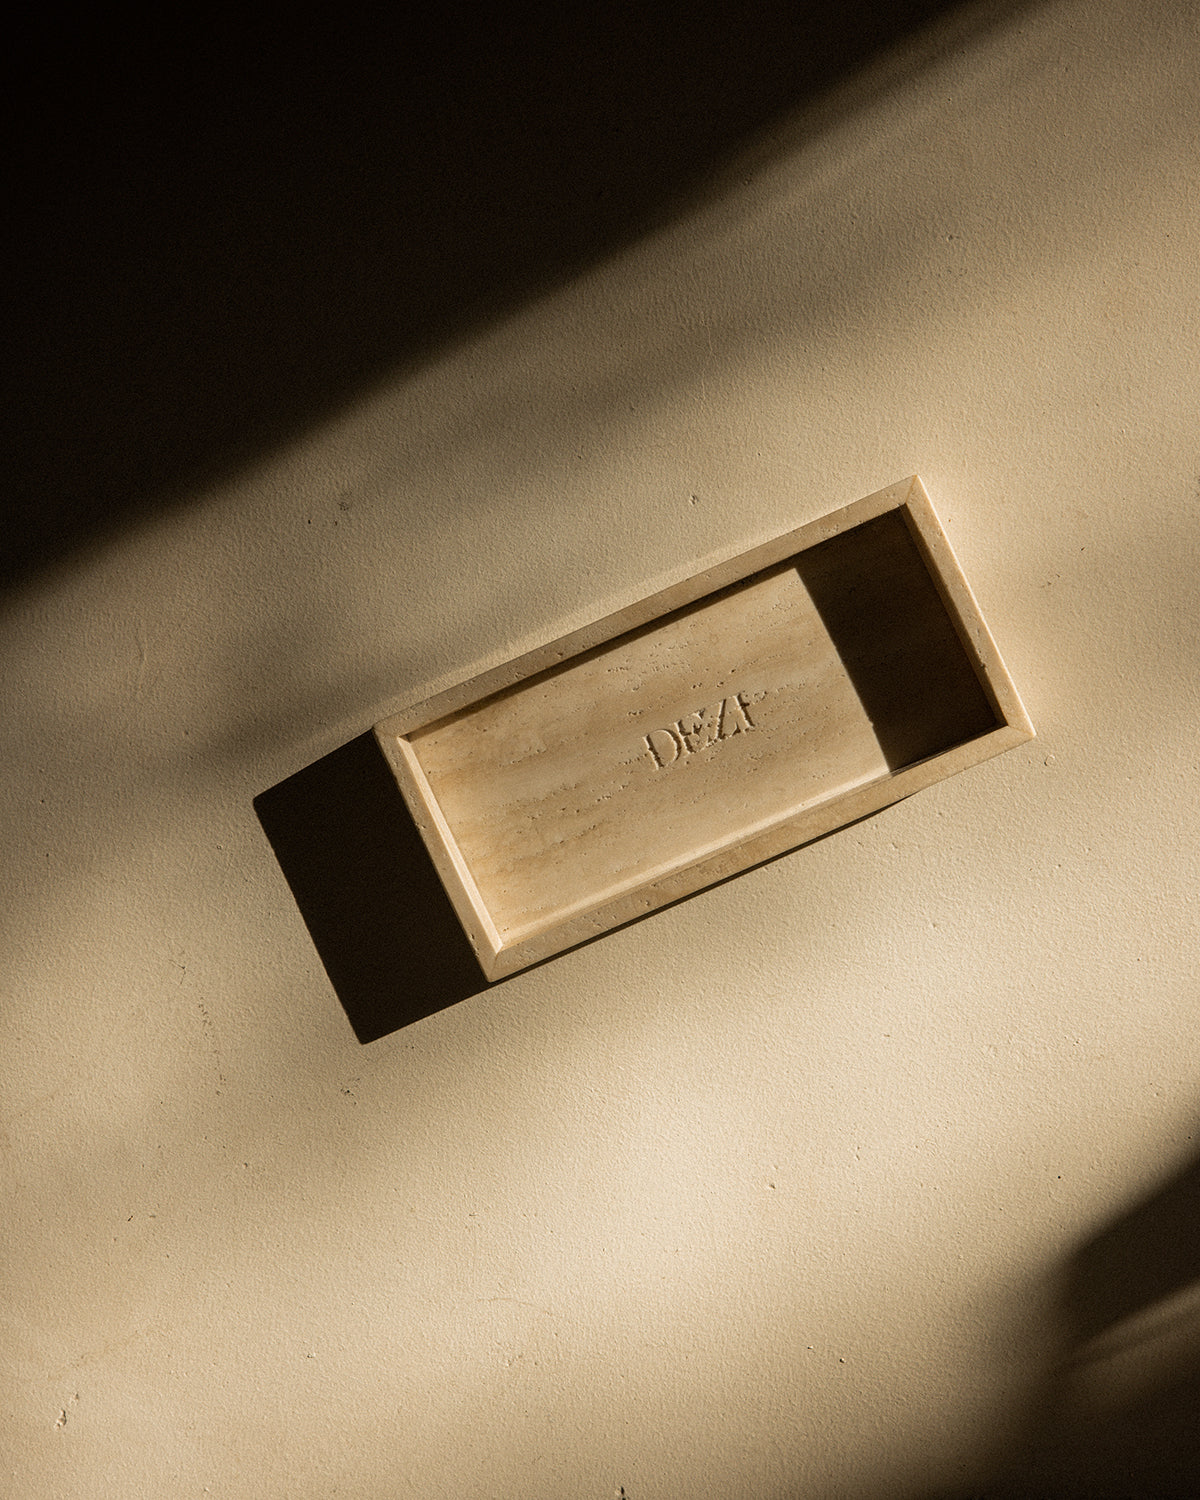 This shows a travertine stone tray with the DEZI logo carved into it. Sunlight is shining on the tray, casting beautiful shadows. 